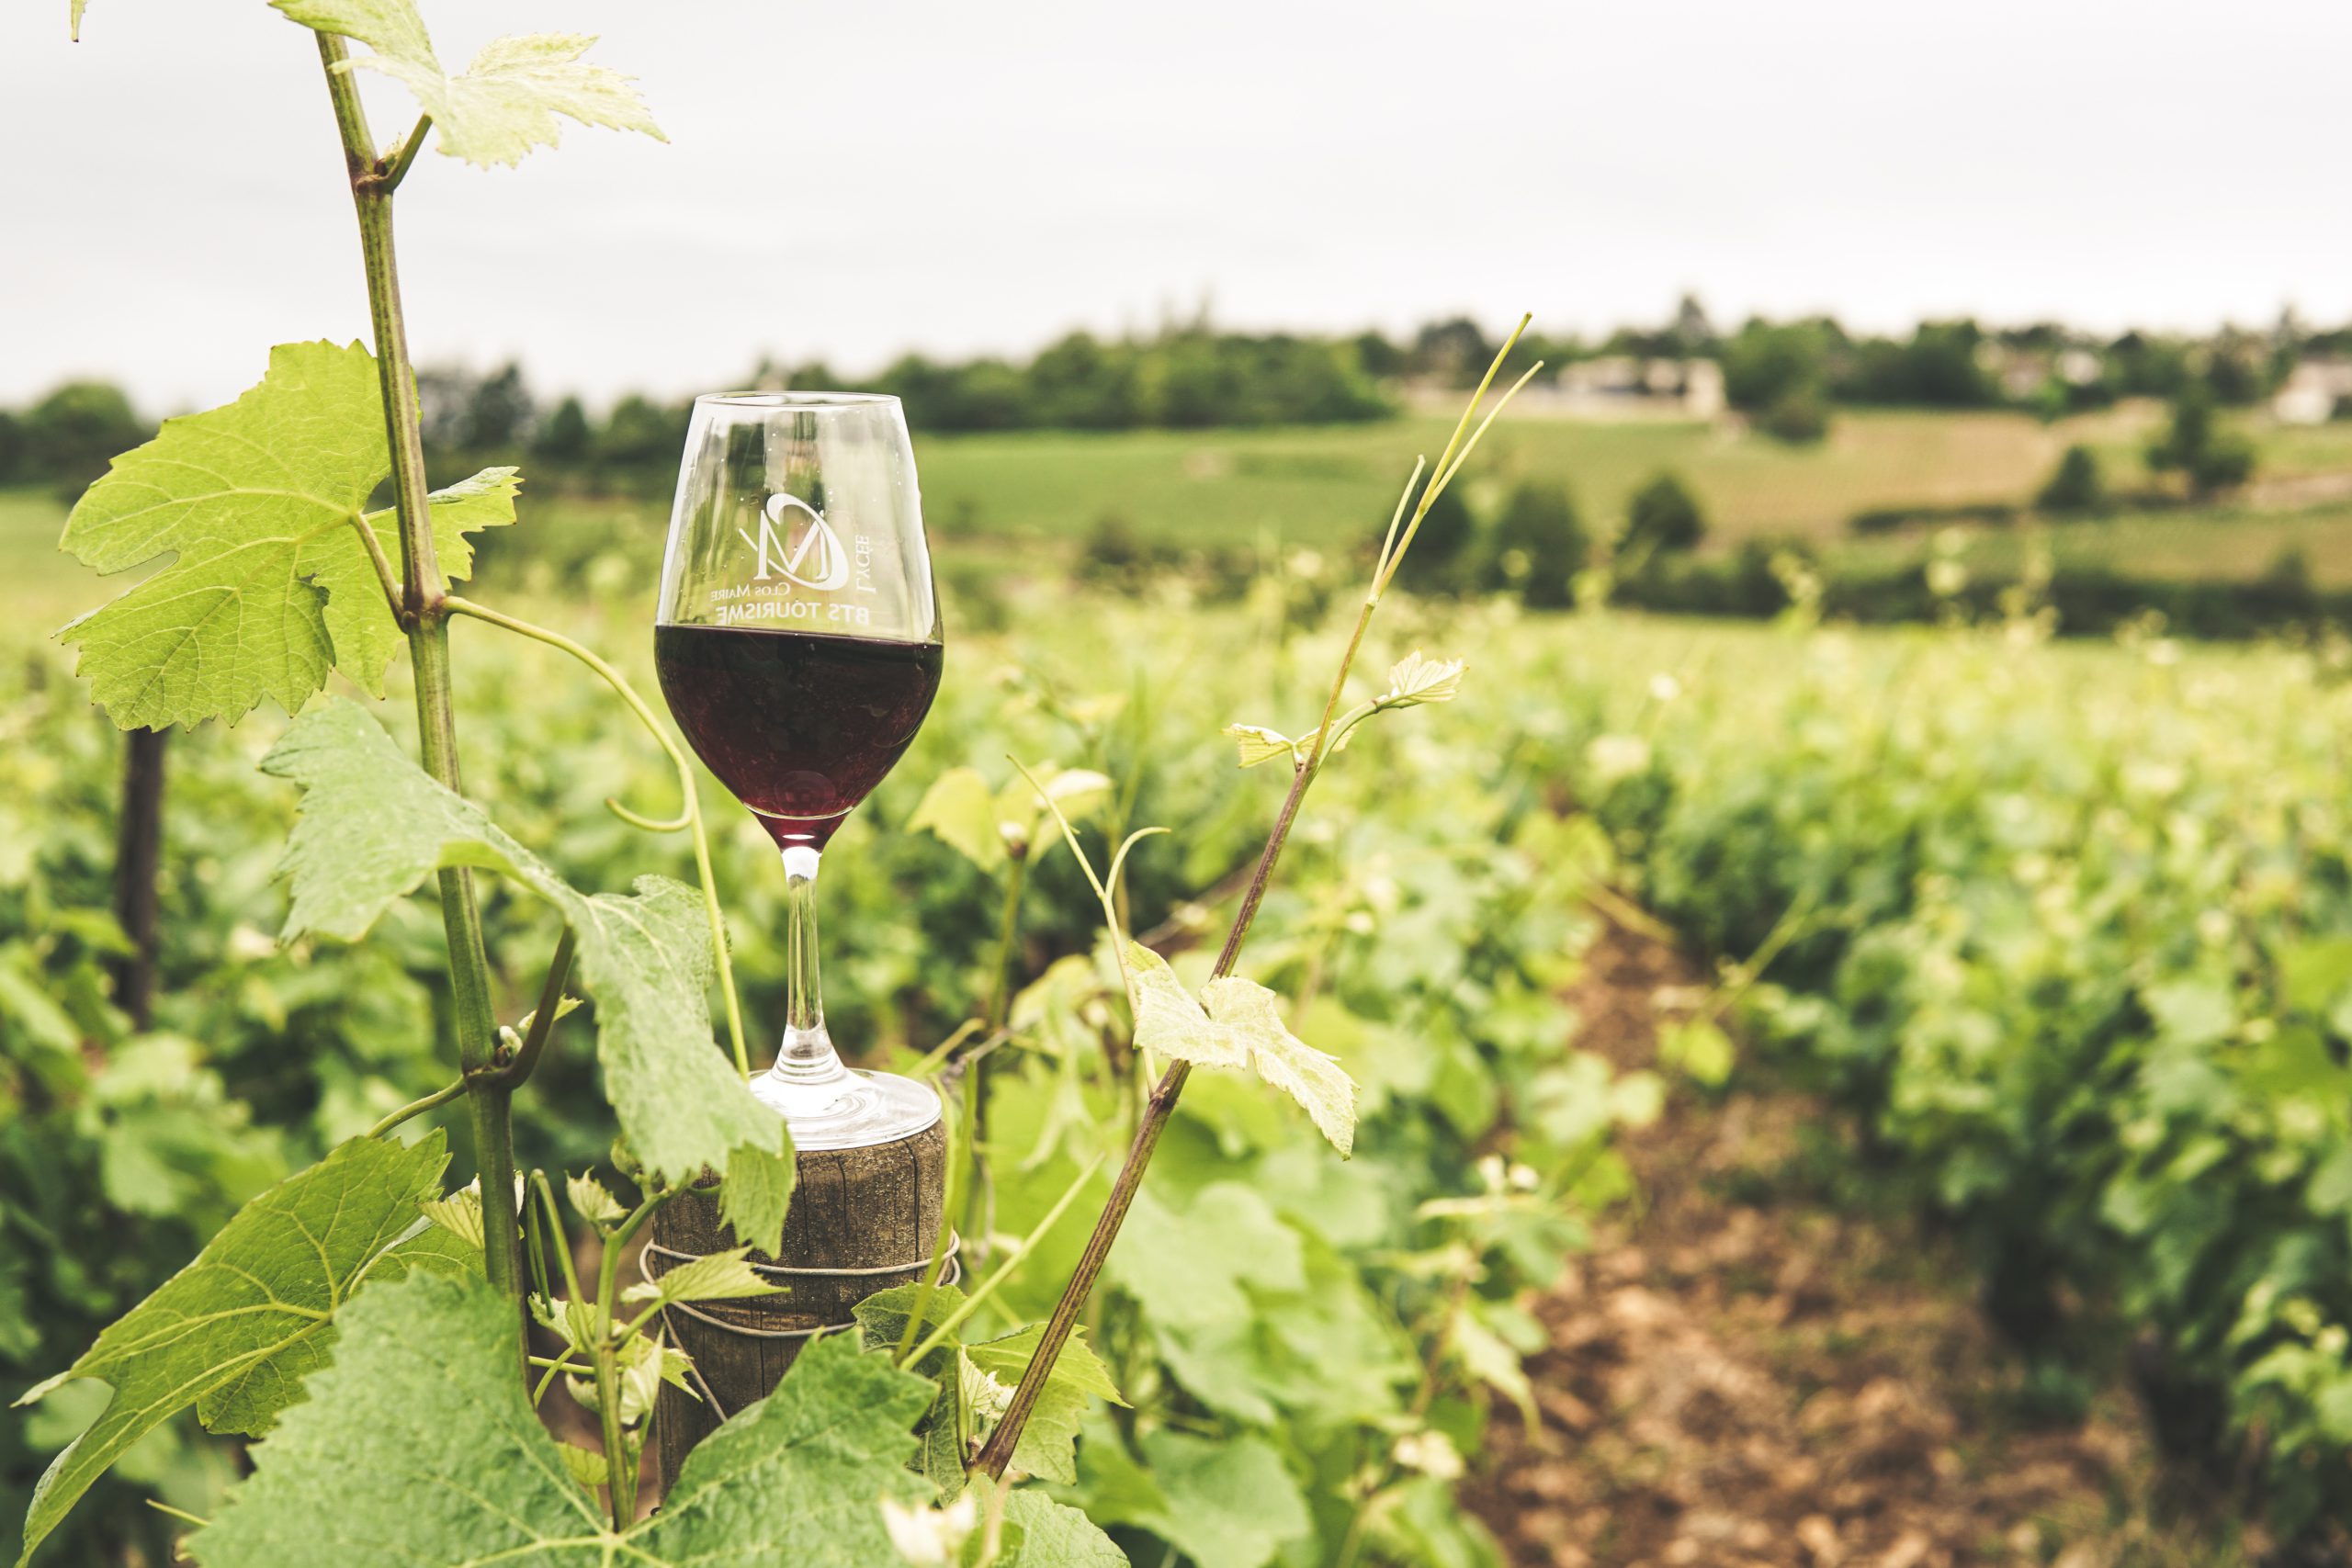 Three Approaches to Vineyard Management: Organic, Biodynamic and Conventional